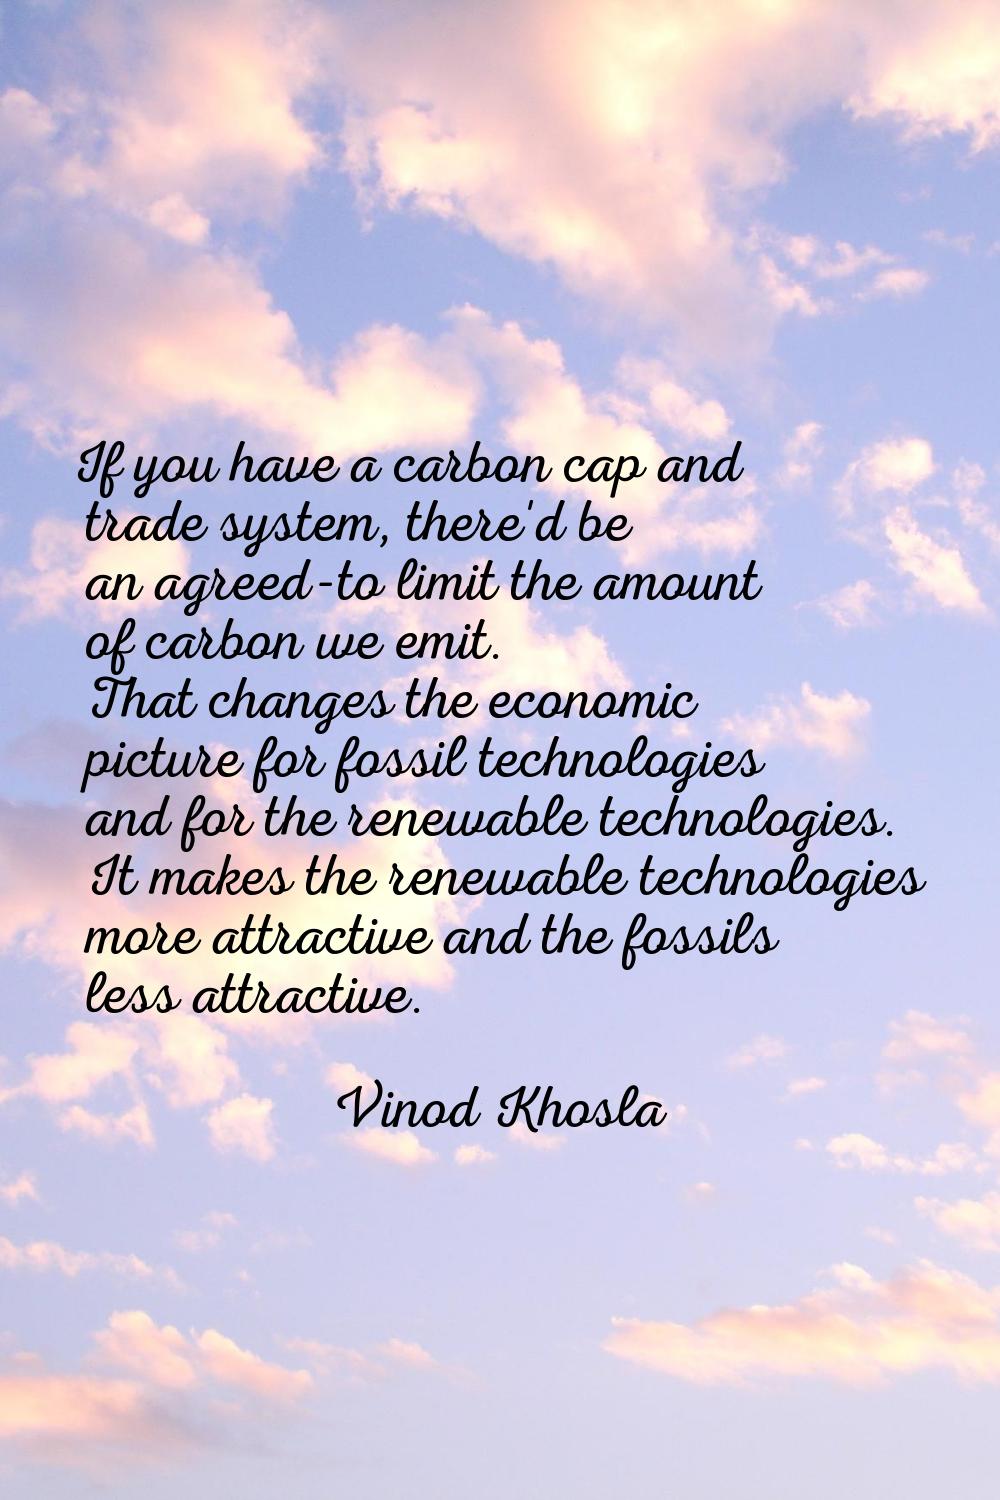 If you have a carbon cap and trade system, there'd be an agreed-to limit the amount of carbon we em